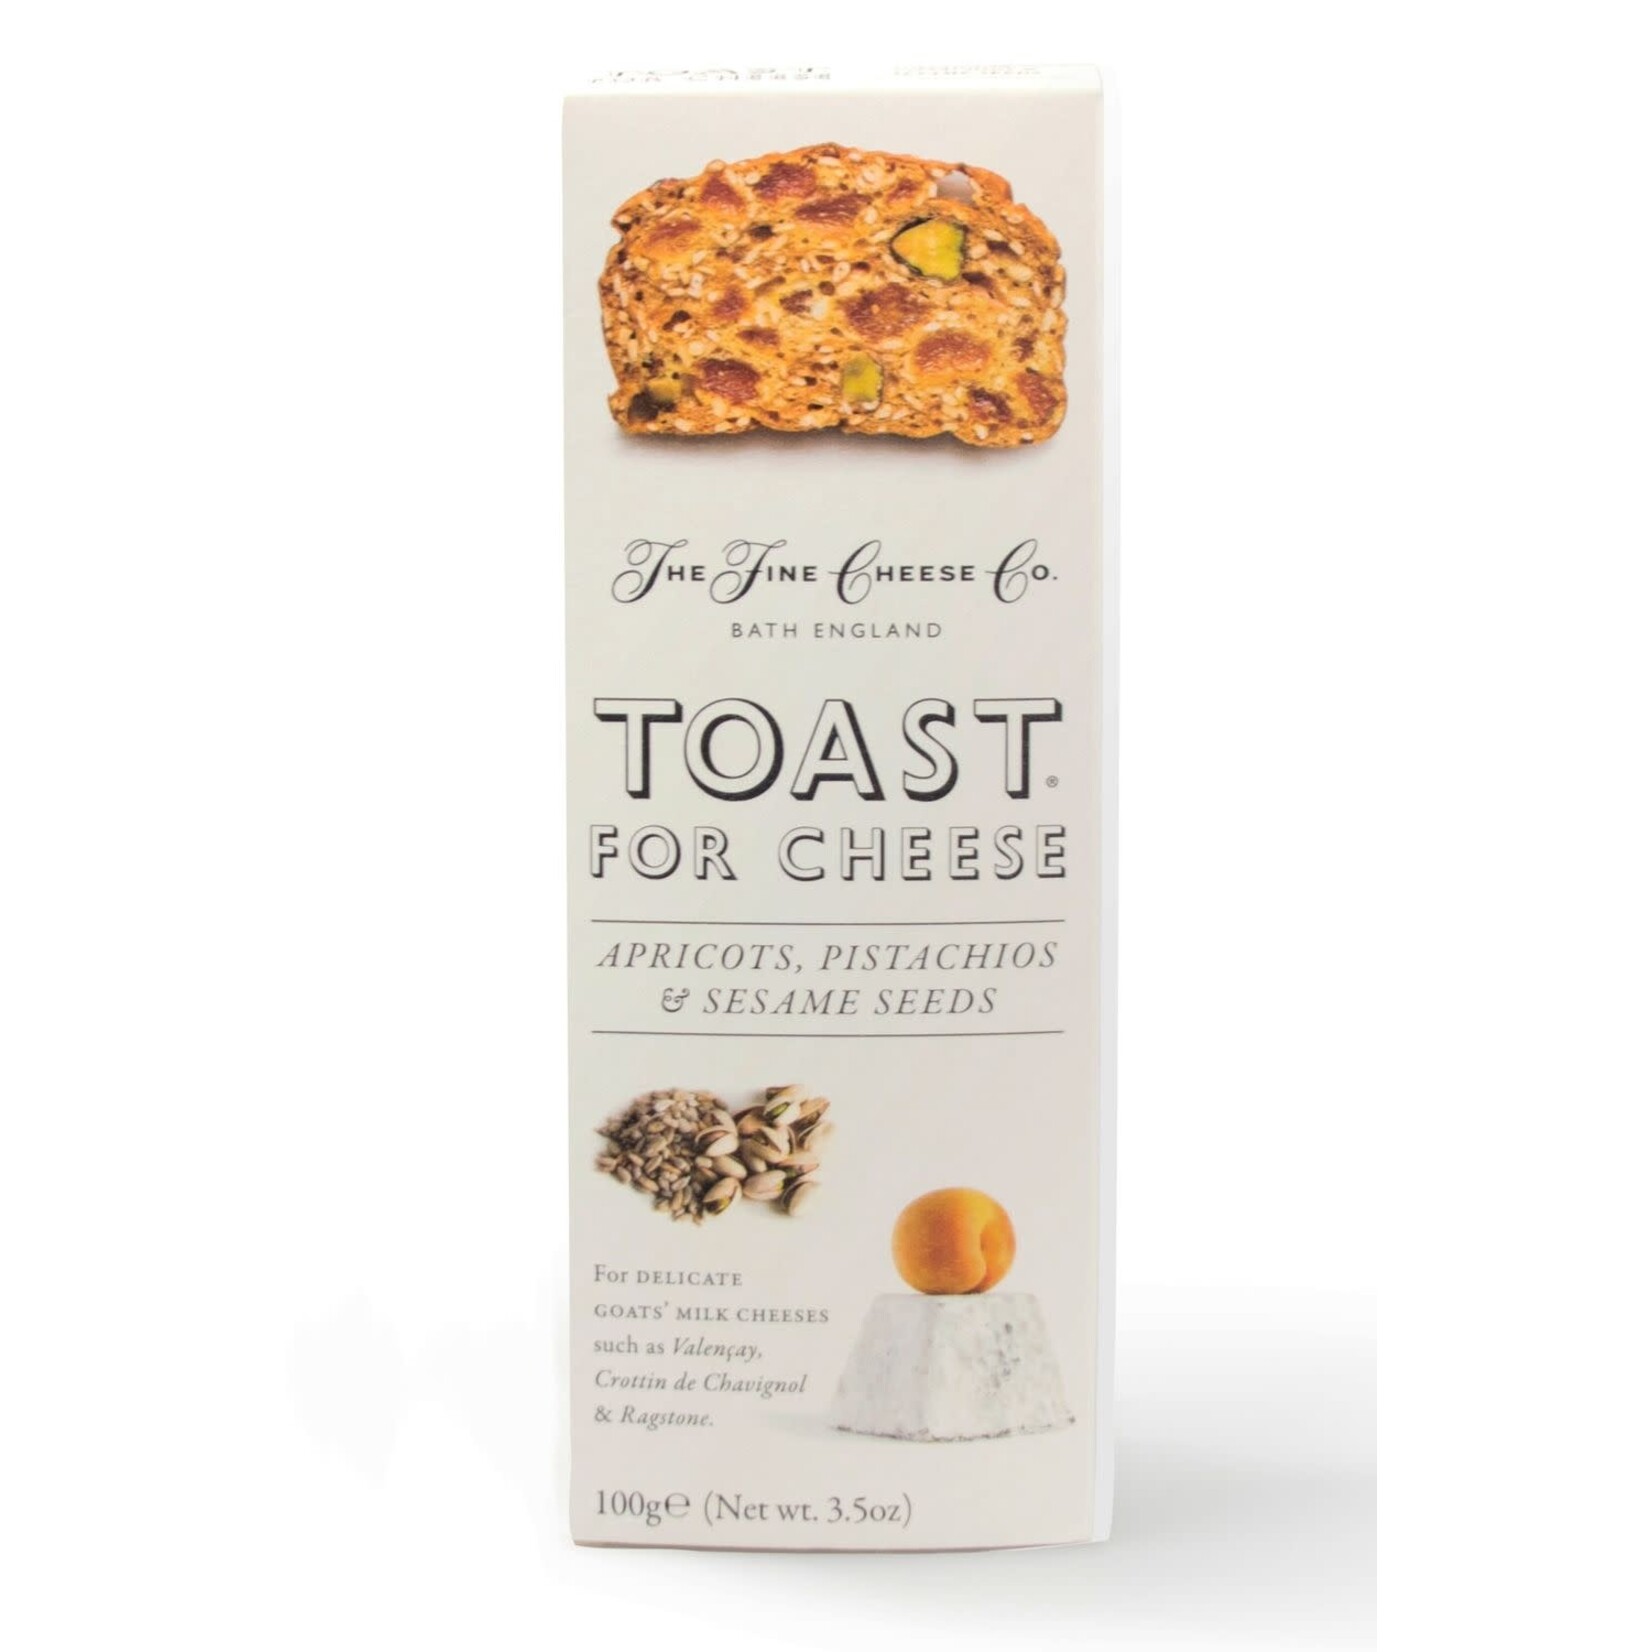 Fine Cheese Co. Apricot and Pistachio toast for Cheese